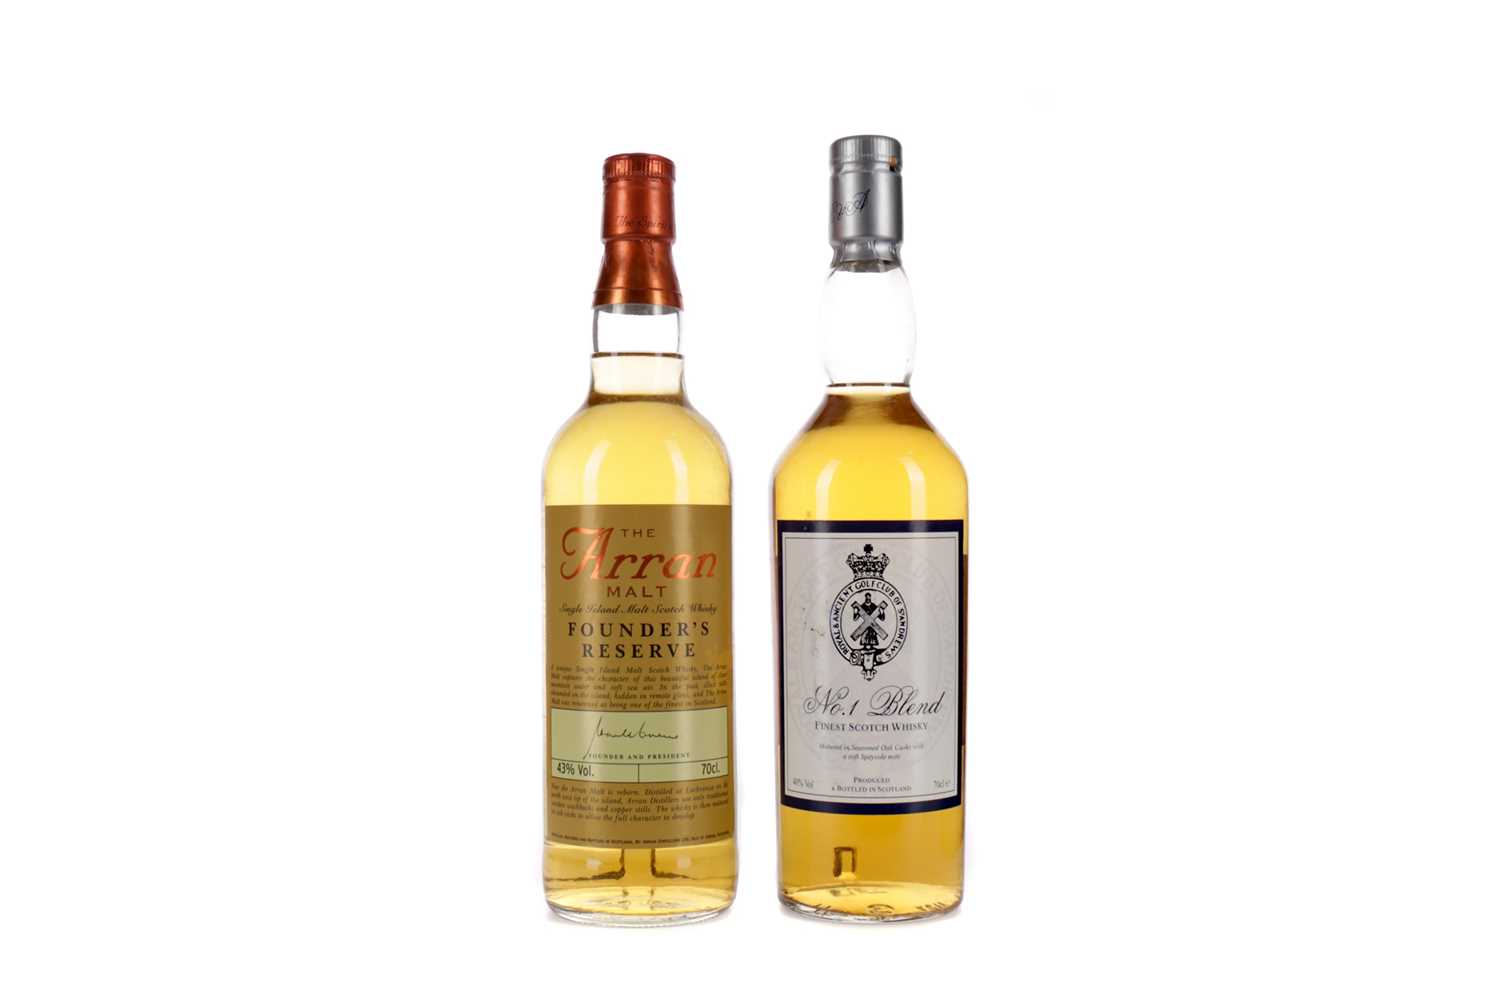 Lot 82 - ARRAN FOUNDER'S RESERVE AND ROYAL & ANCIENT NO. 1 BLEND